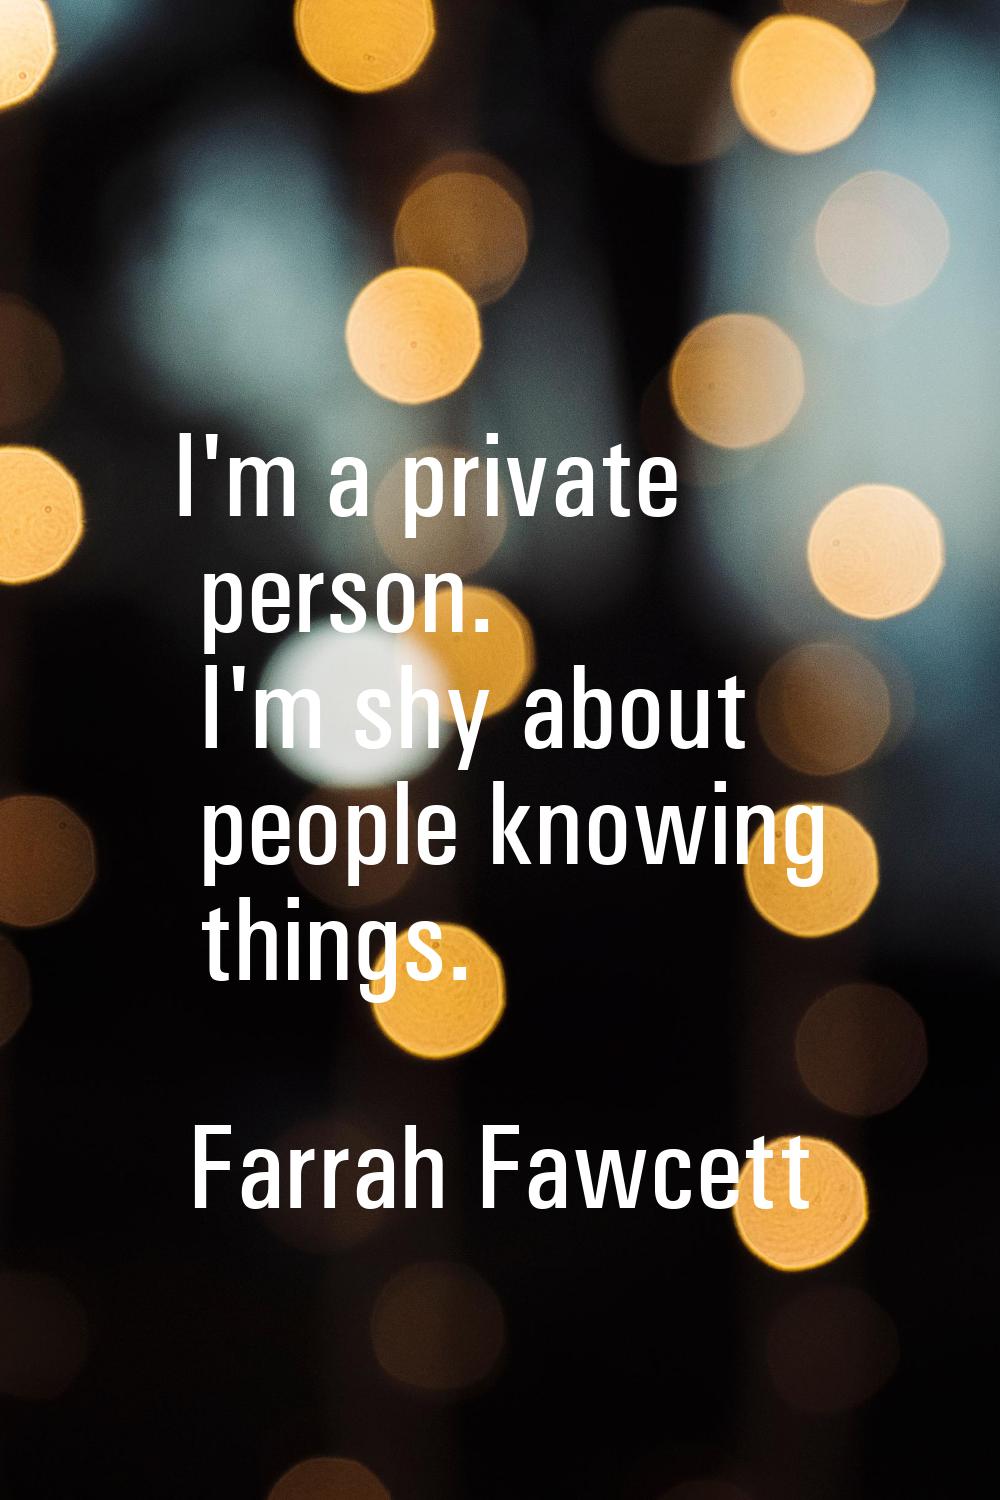 I'm a private person. I'm shy about people knowing things.